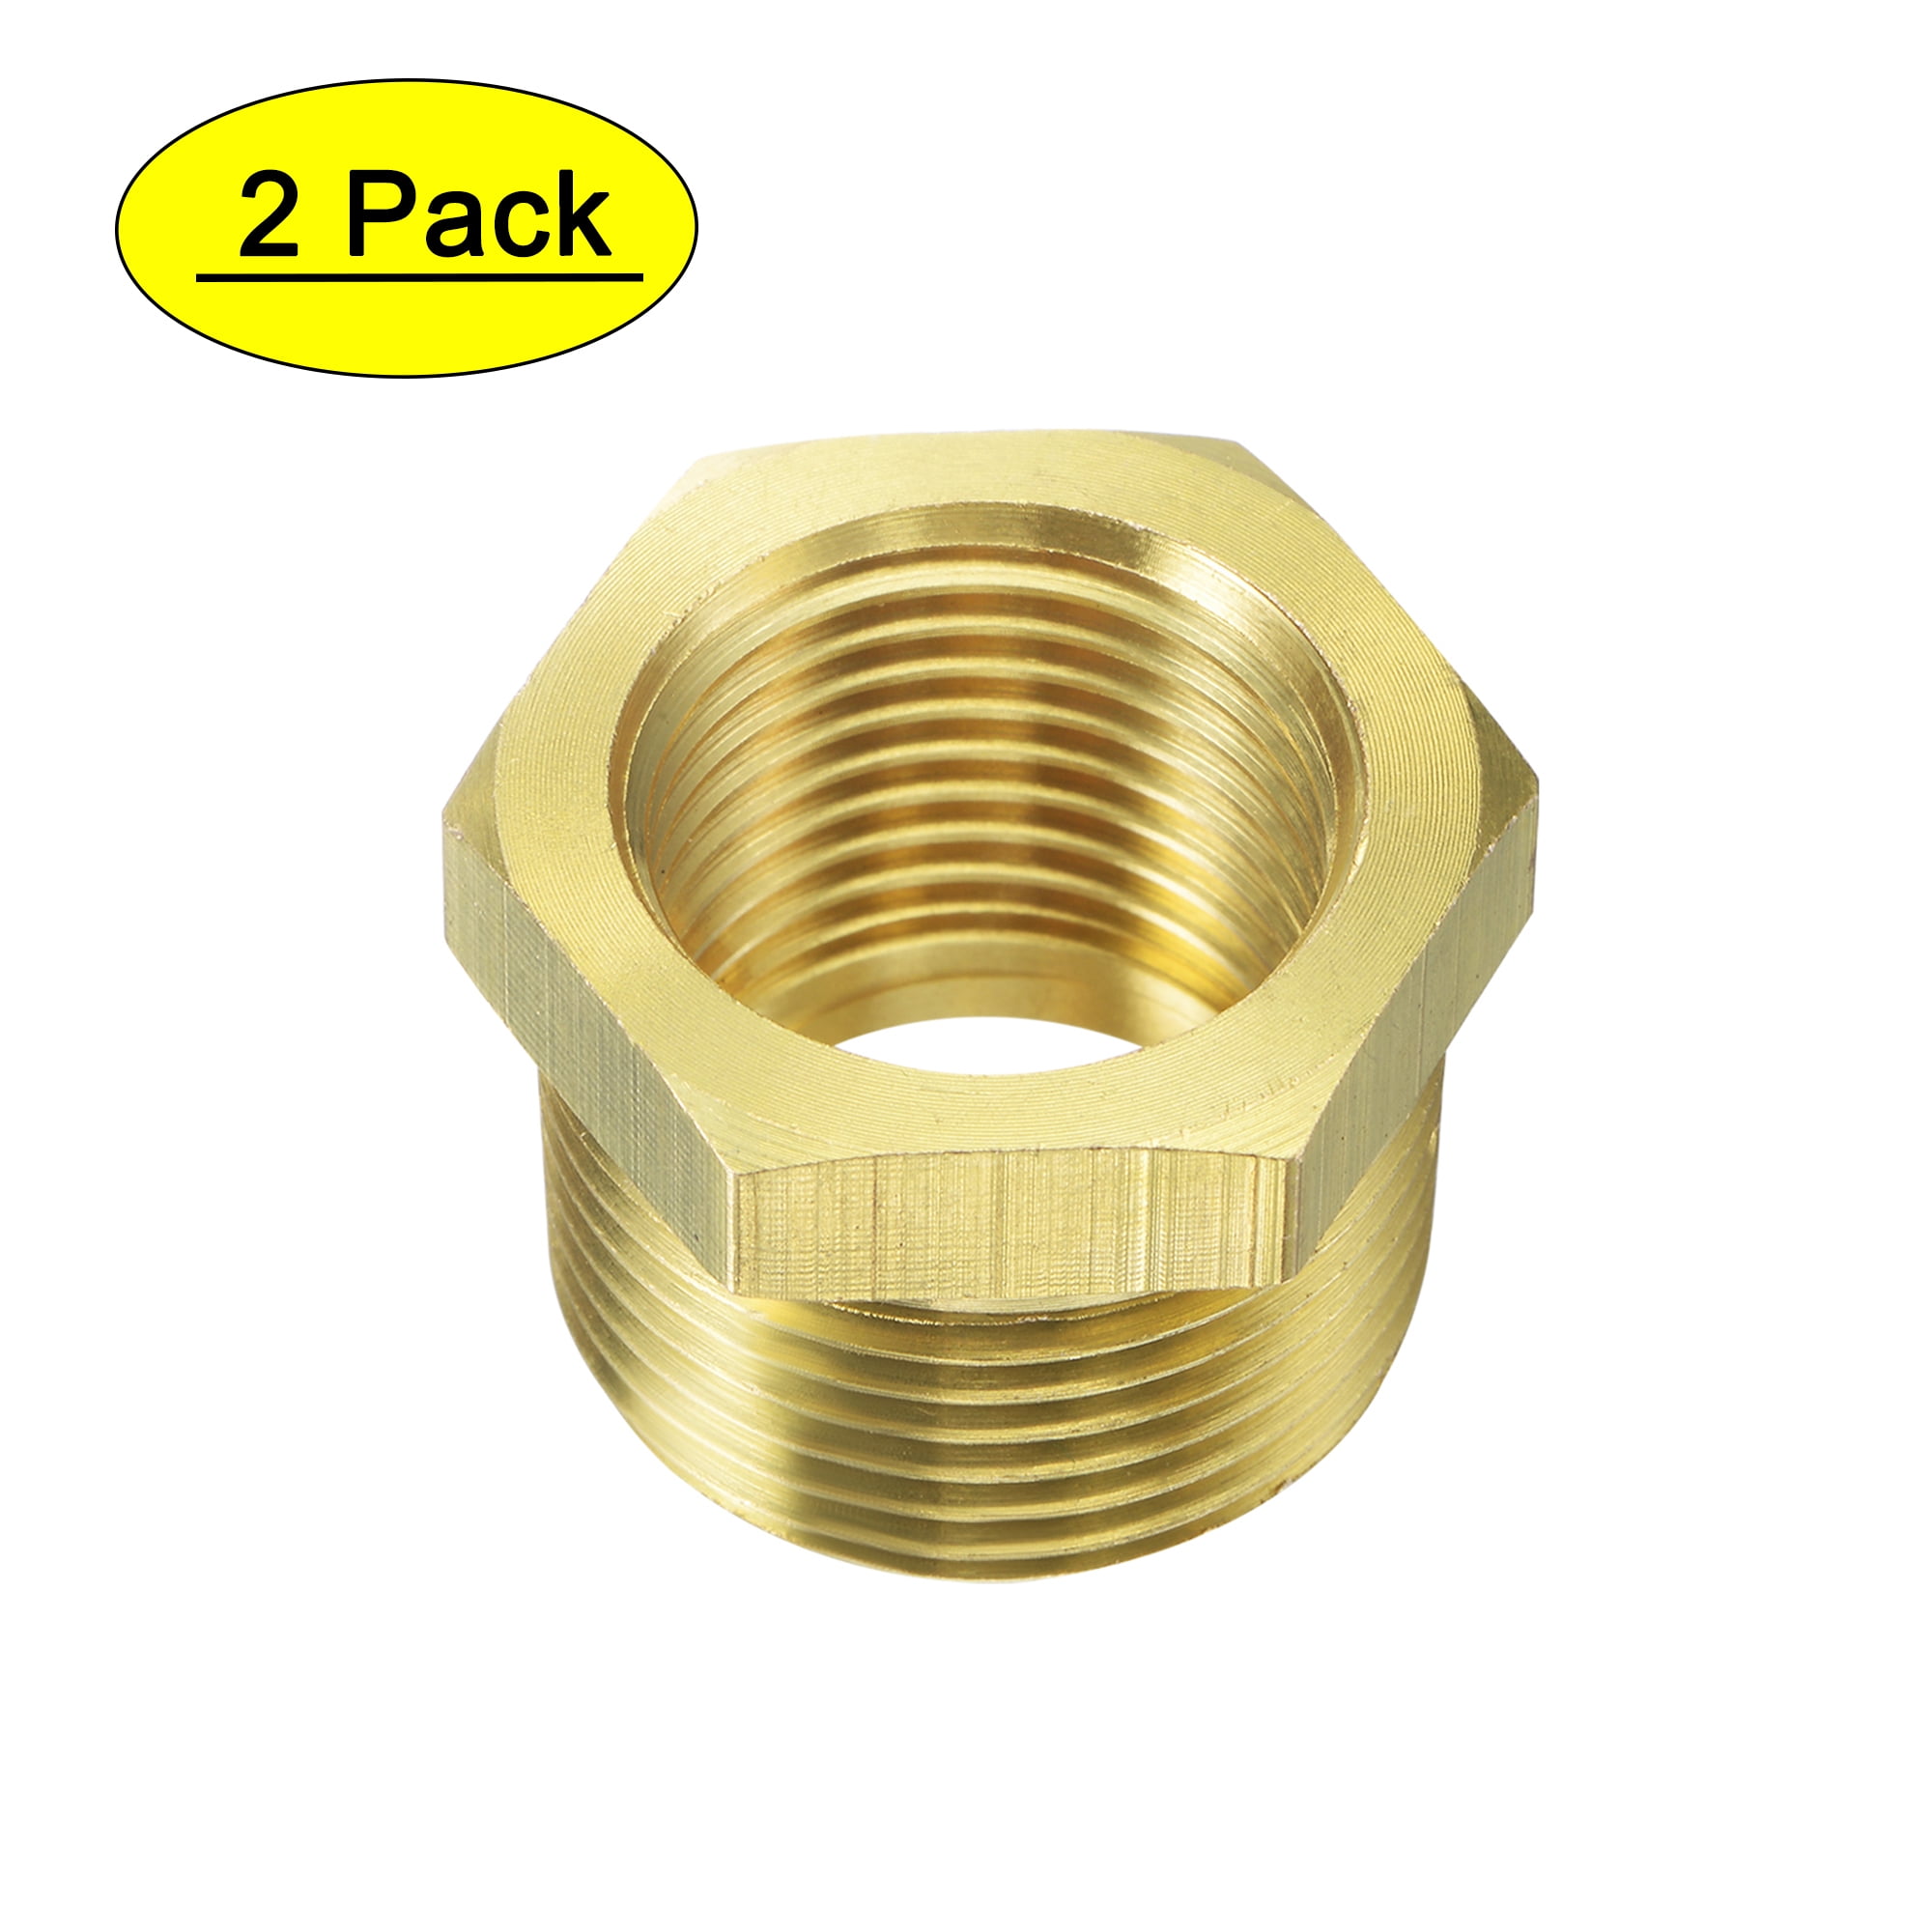 KTS LOT 5 Brass Elbow Pipe Fitting Connector Coupler 90 Deg 1/4 BSP Female to 1/4 BSP Female Thread for Water Fuel 